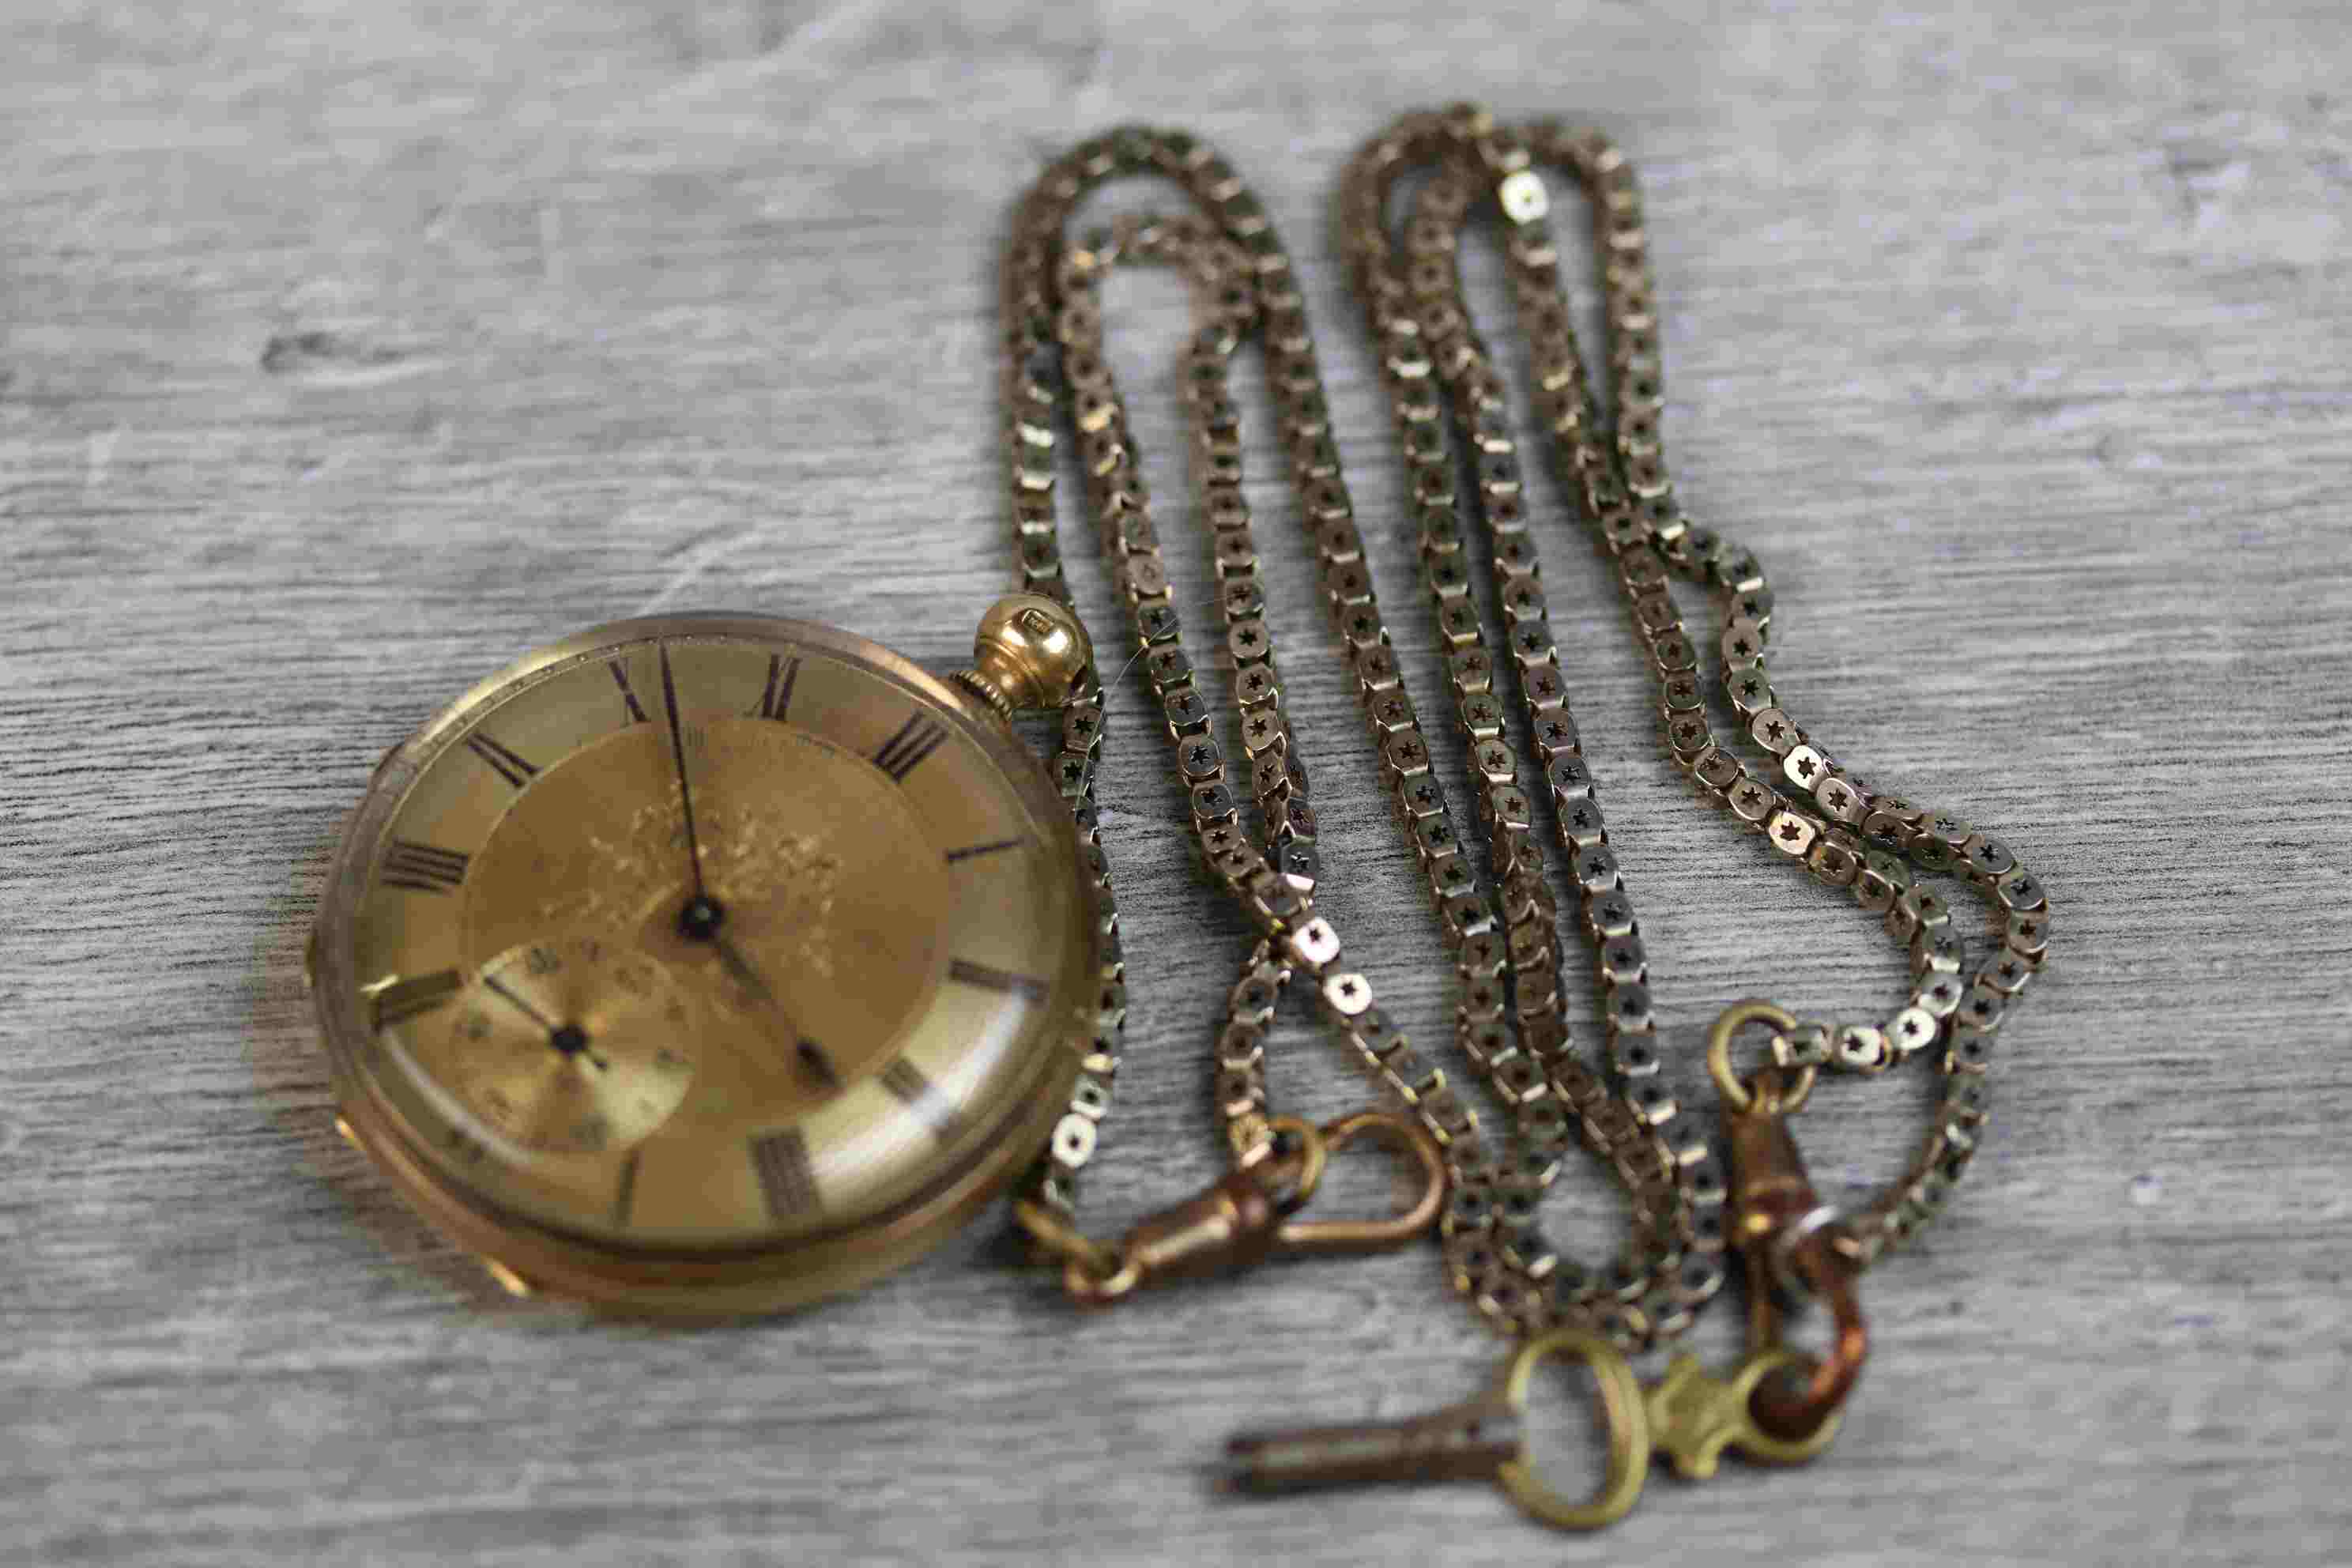 18ct yellow gold open faced key wind pocket watch, gilt engine turned dial and subsidiary dial, - Image 4 of 6